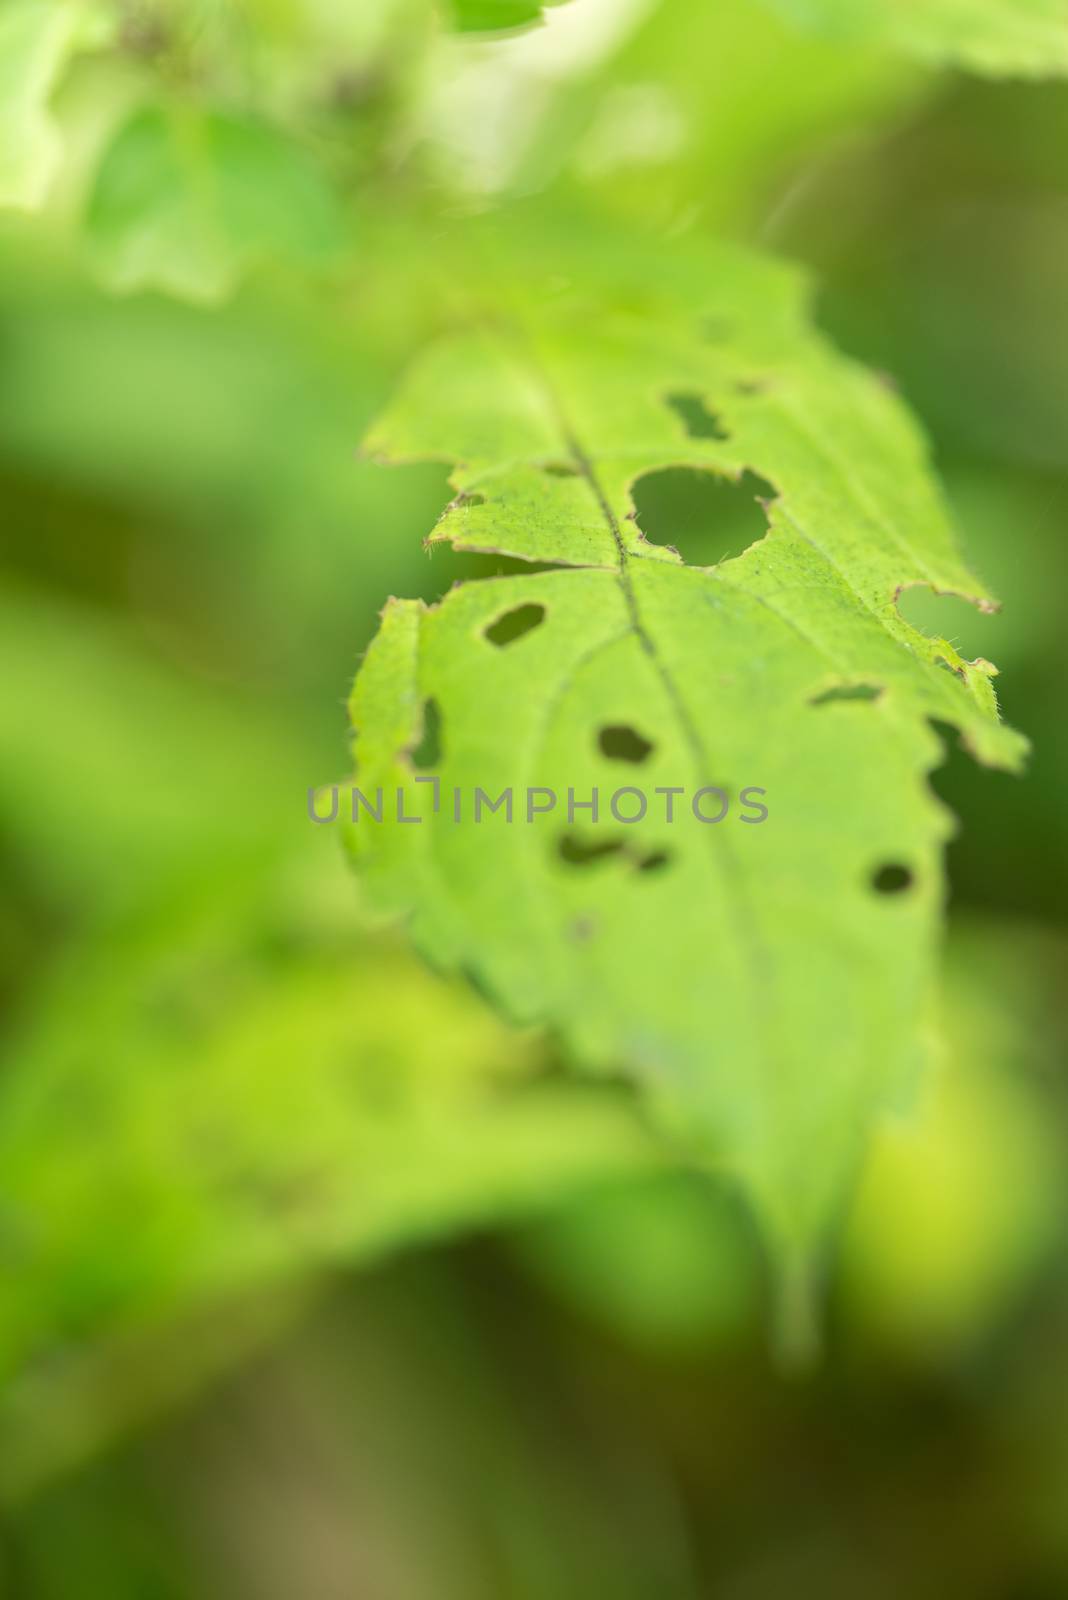 A green leaf with many holes in it eaten by a bug.